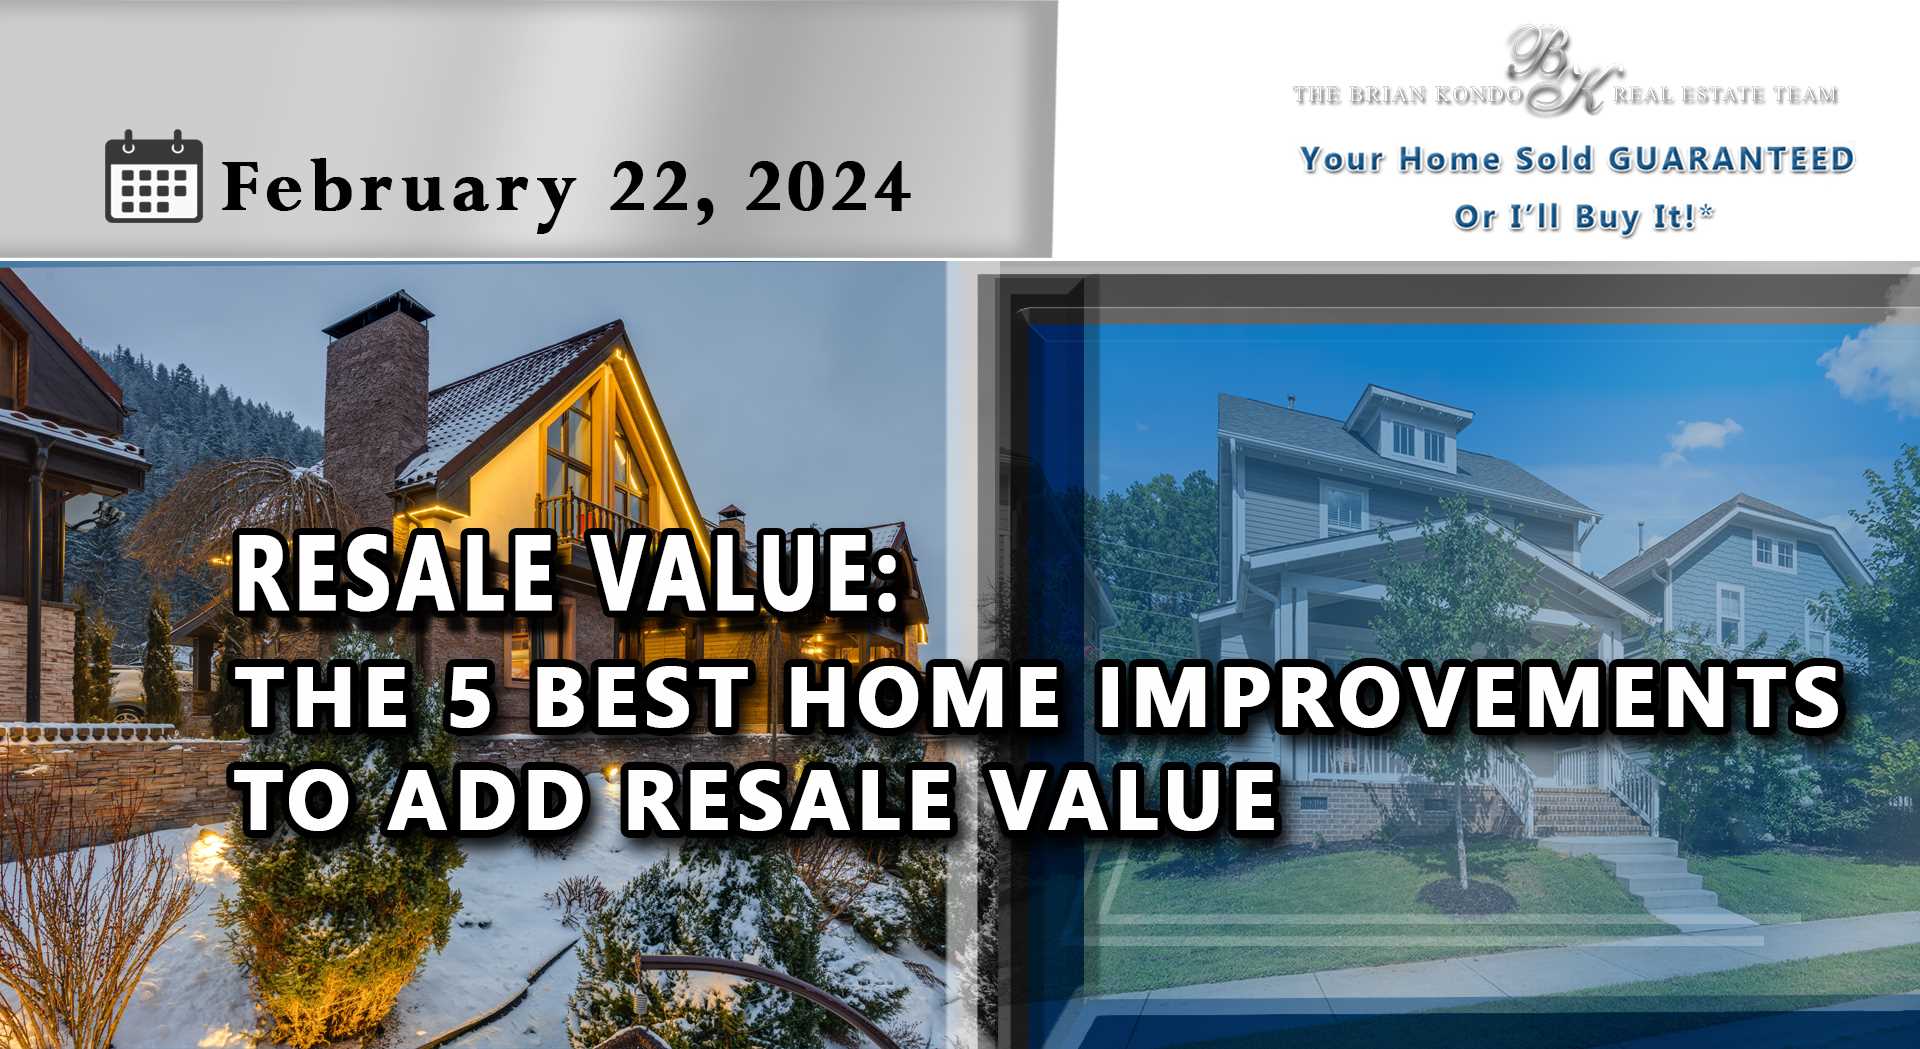 RESALE VALUE: THE 5 BEST HOME IMPROVEMENTS TO ADD RESALE VALUE